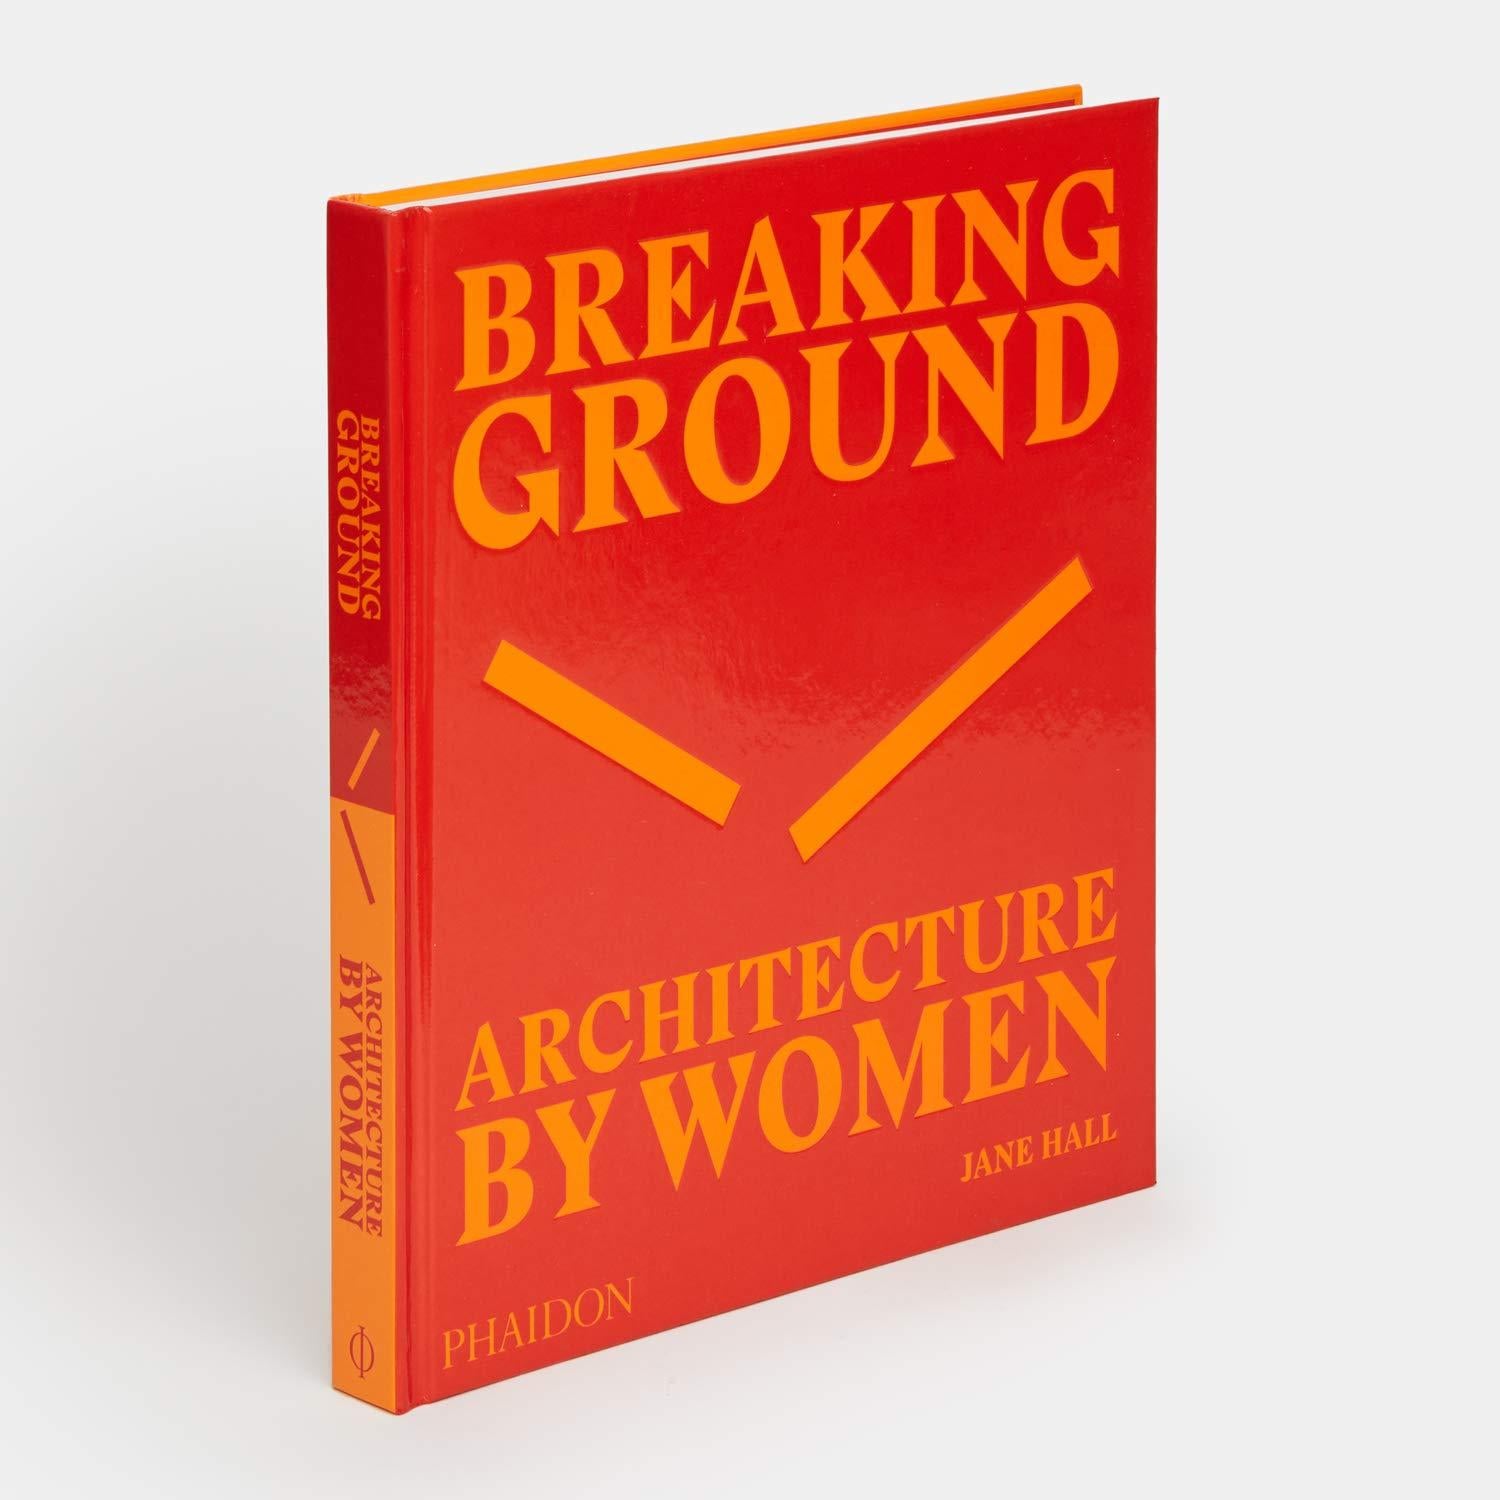 Breaking Ground: Architecture by Women (Hardcover) by Jane Hall
In stock in Los Angeles

A ground-breaking visual survey of architecture designed by women from the early twentieth century to the present day

'Would they still call me a diva if